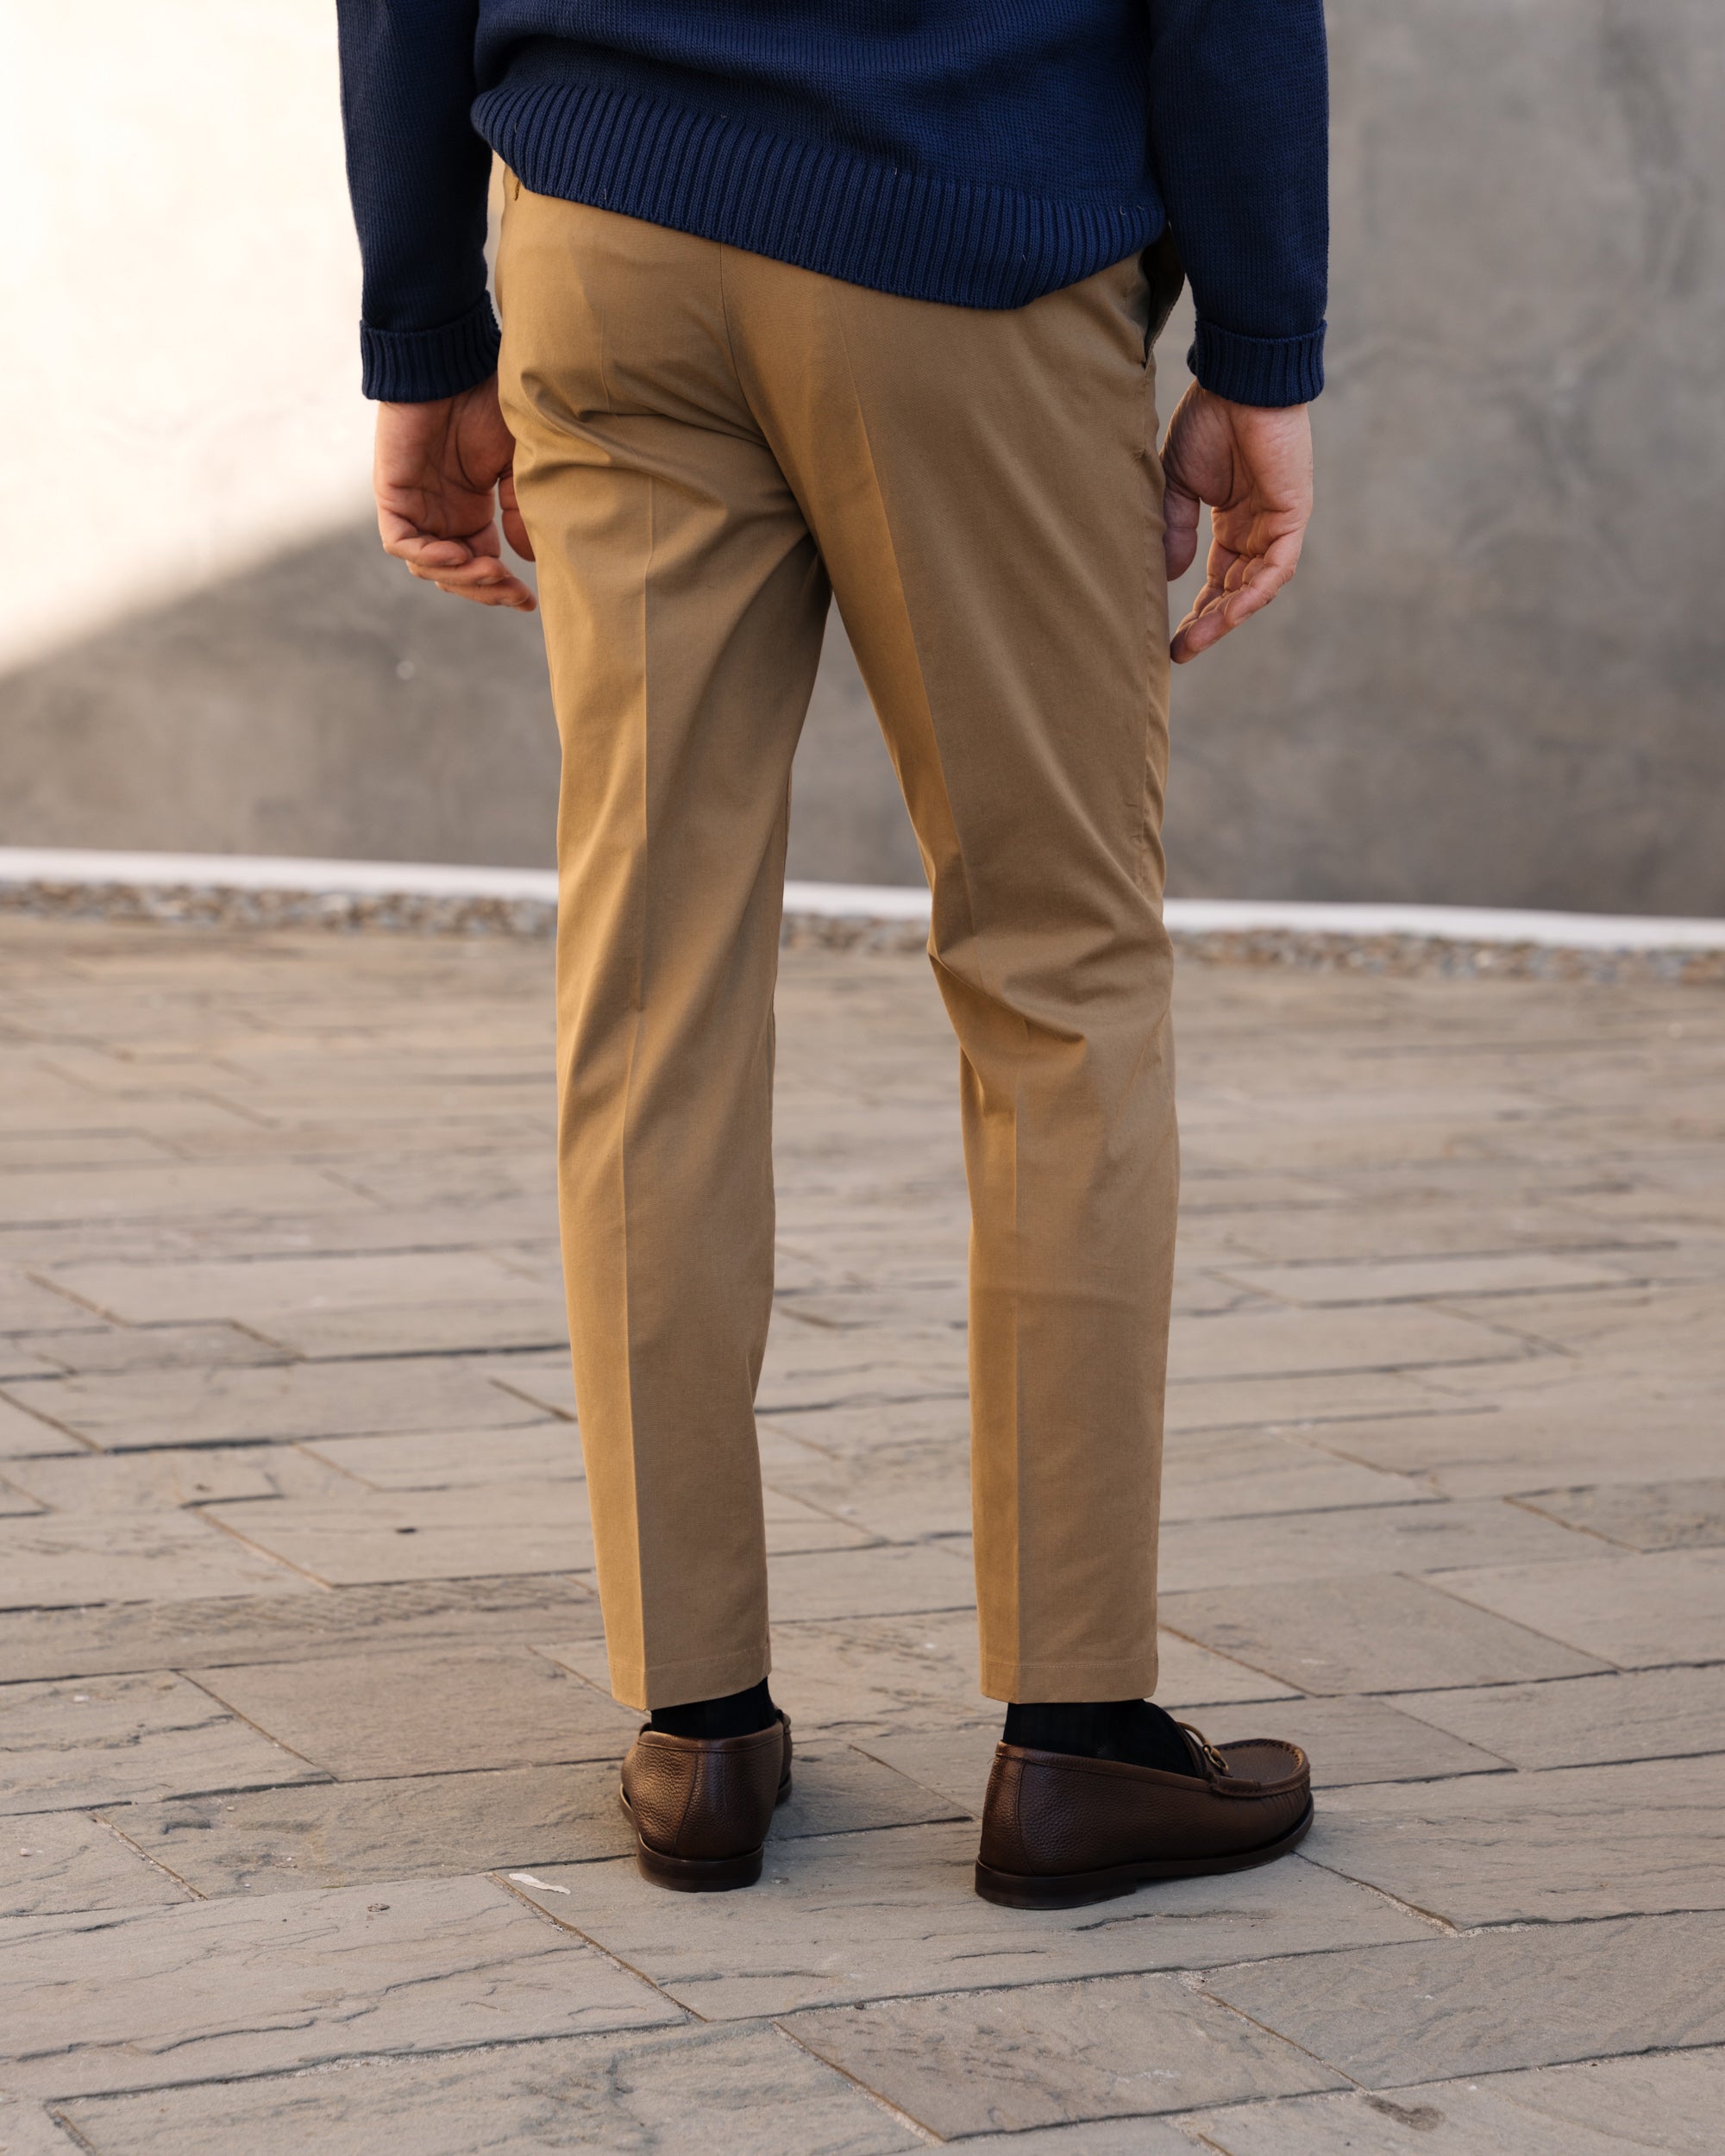 Velasca  Men's brown pleated linen pants, entirely made in Italy